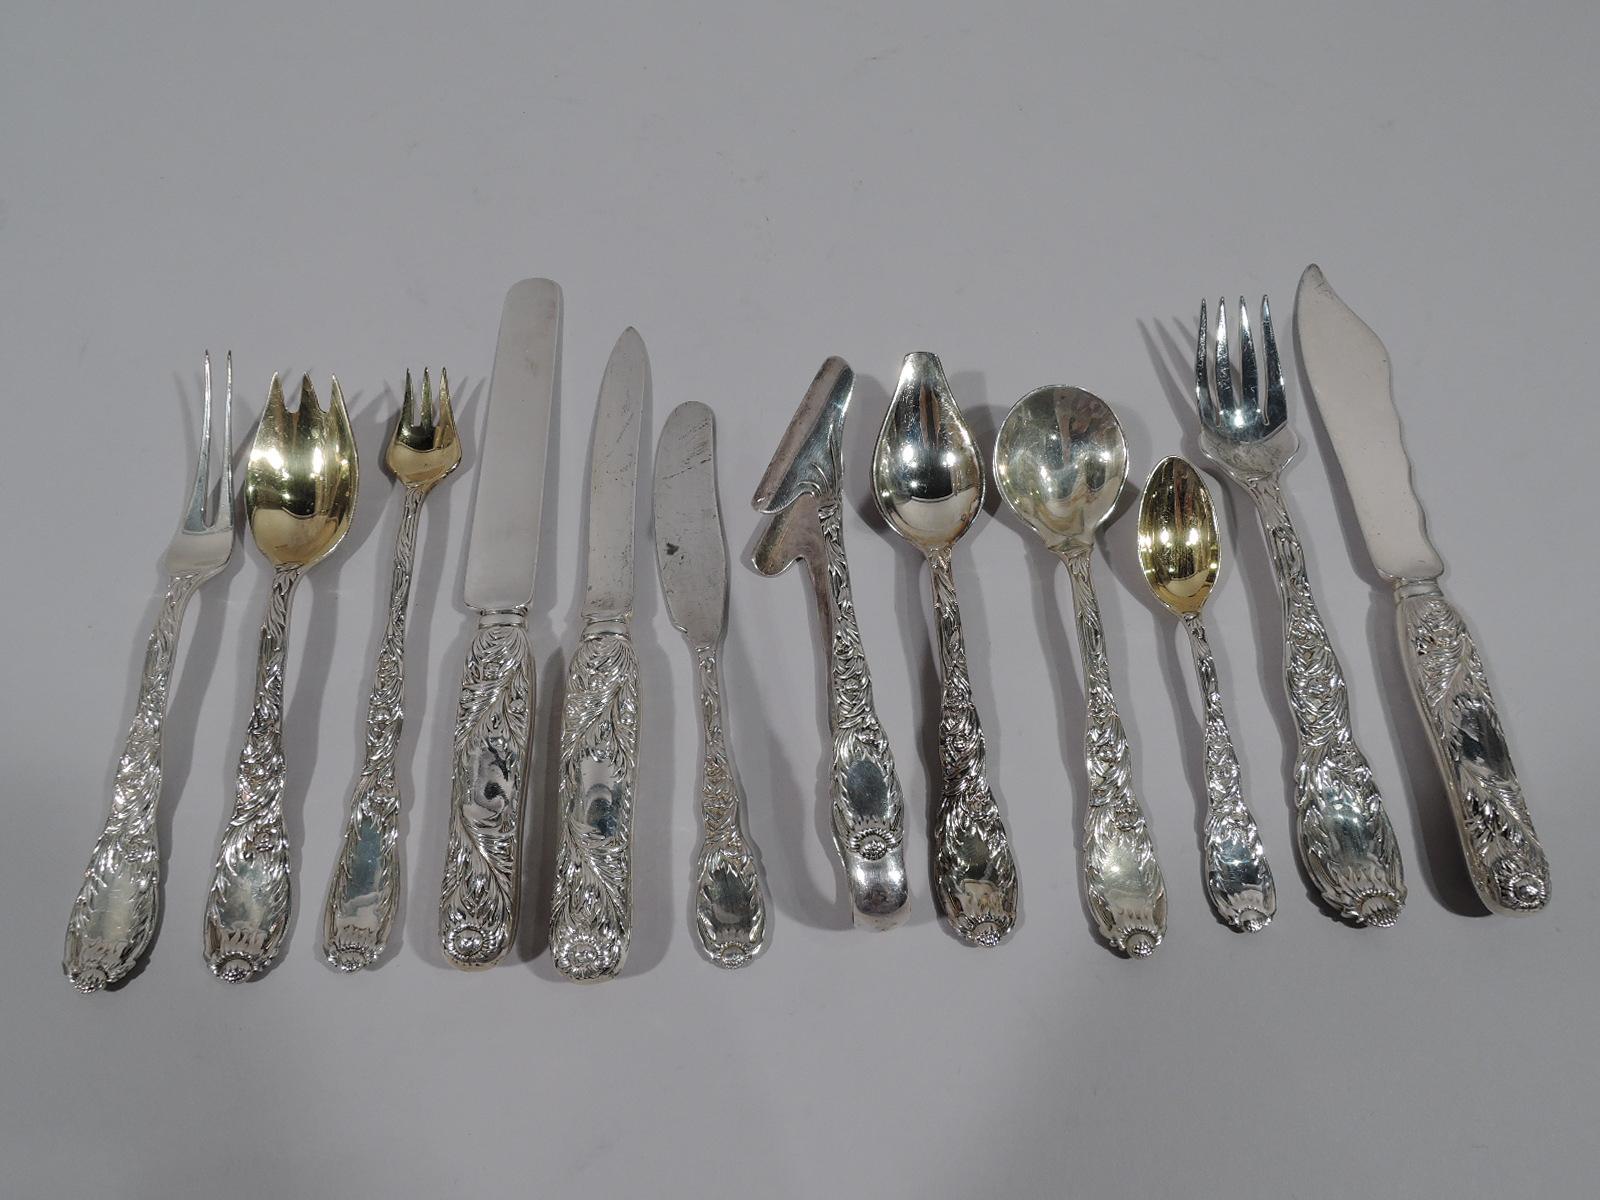 Chrysanthemum sterling silver dinner set for 12. Made by Tiffany & Co. in New York, ca 1910.

This set comprises 267 pieces (dimensions in inches): Knives: 12 dinner knives (10), 12 lunch knives (9), 12 breakfast knives (7 1/2), 12 fish knives (7